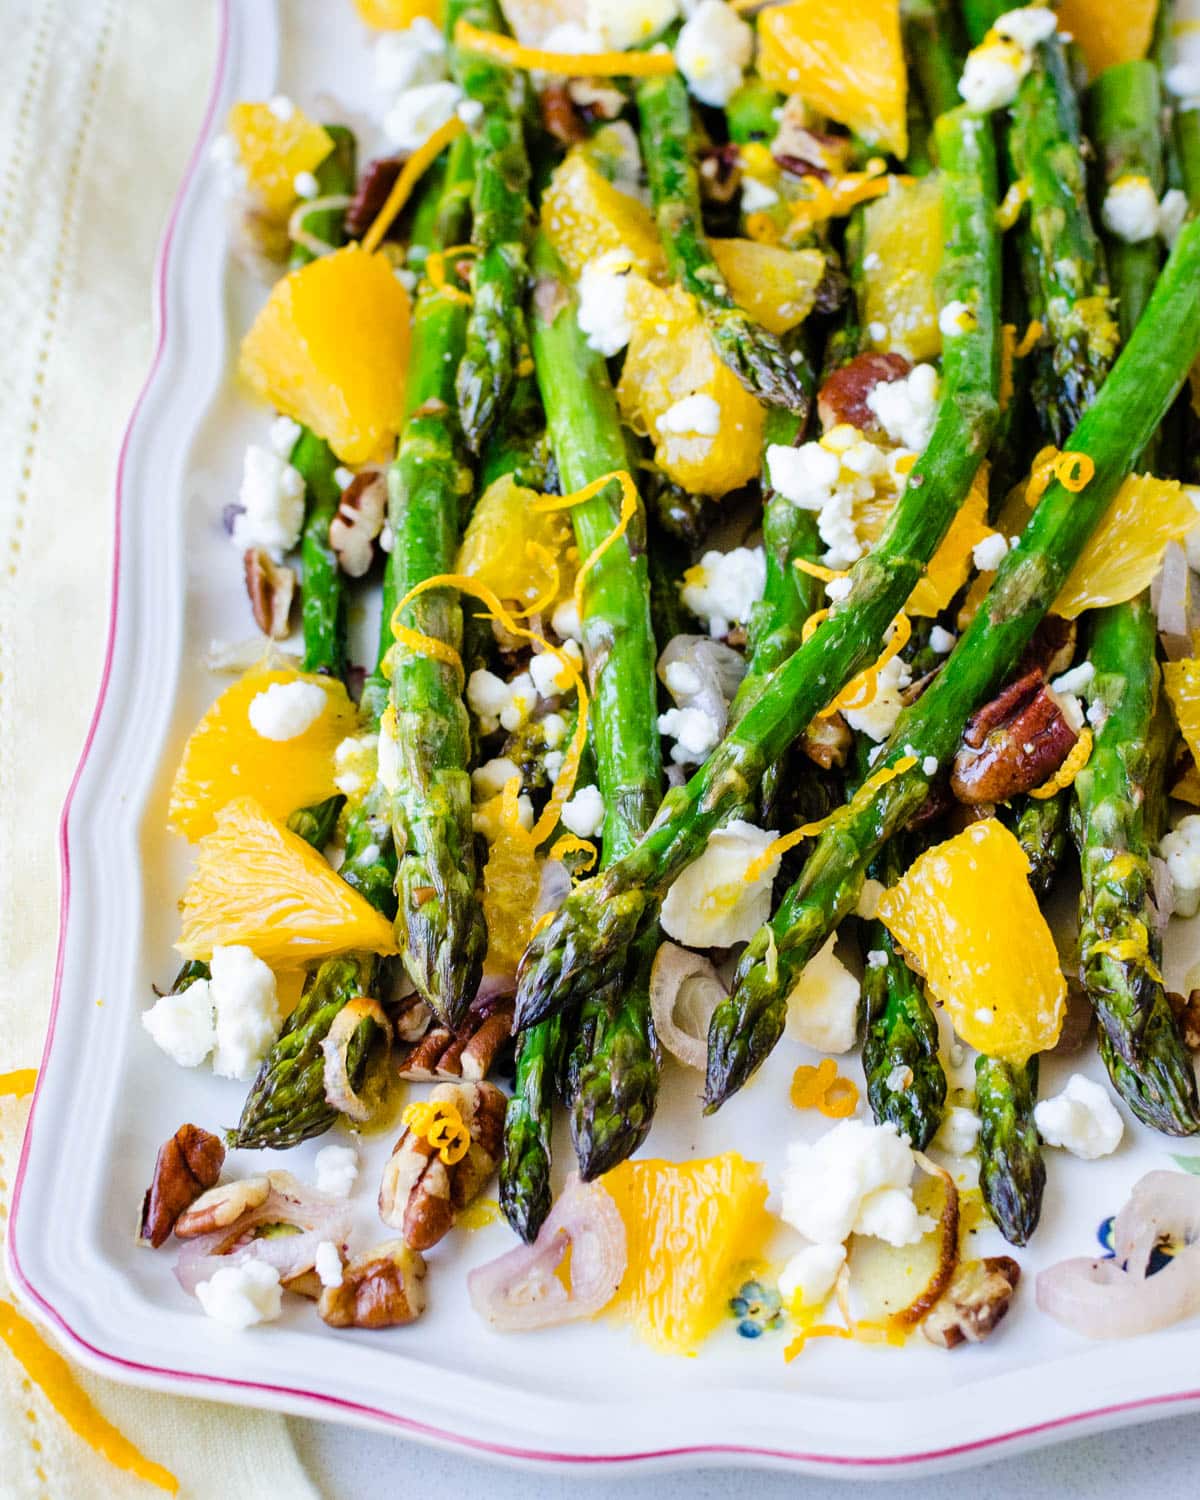 A platter of roasted baby asparagus with citrus.